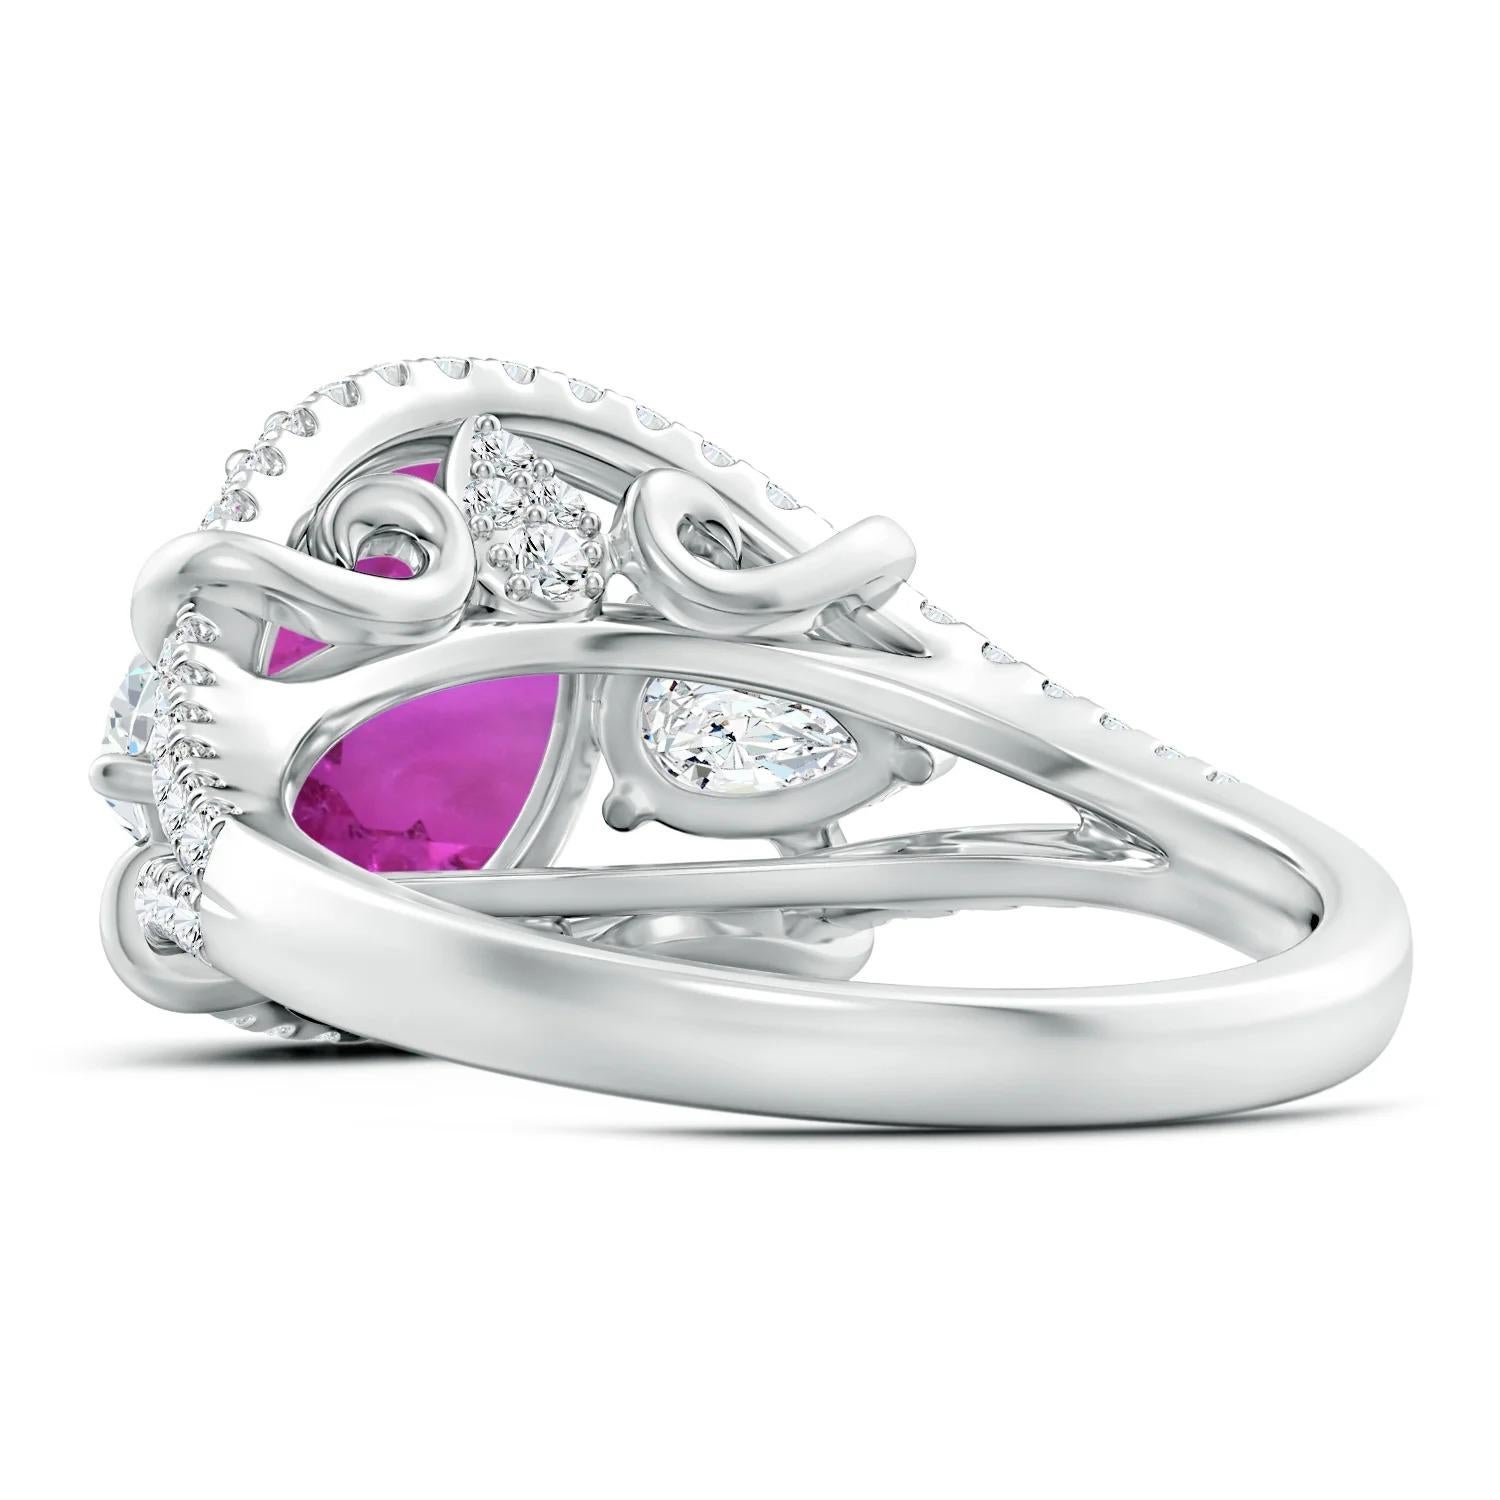 For Sale:  GIA Certified Natural Pink Sapphire Ring in White Gold with Diamonds 4